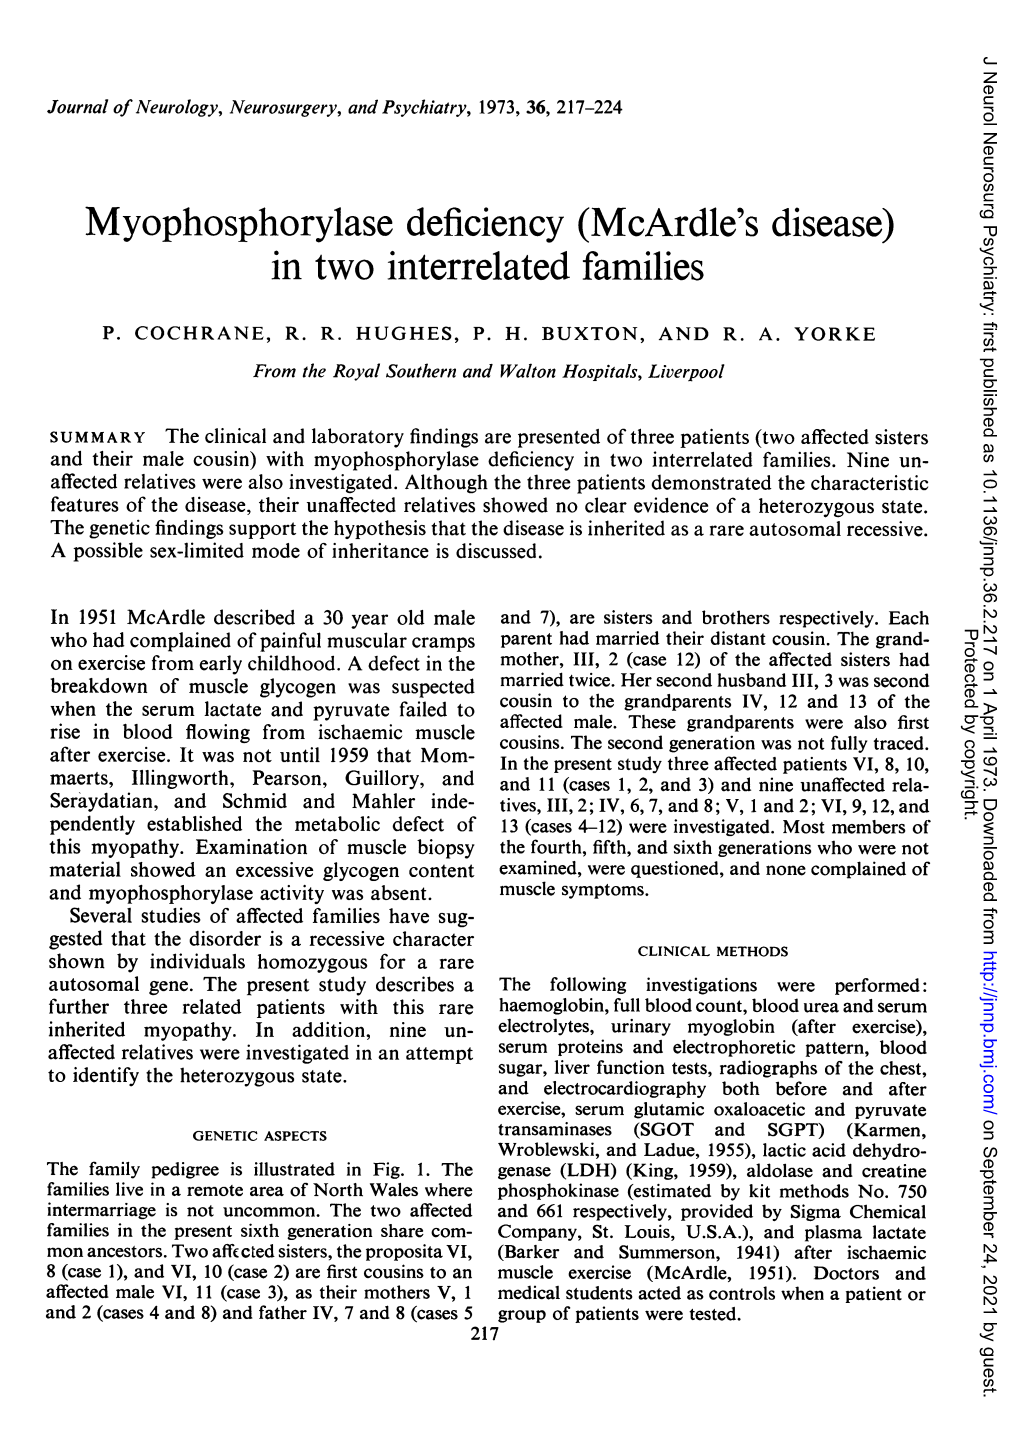 Mcardle's Disease) in Two Interrelated Families